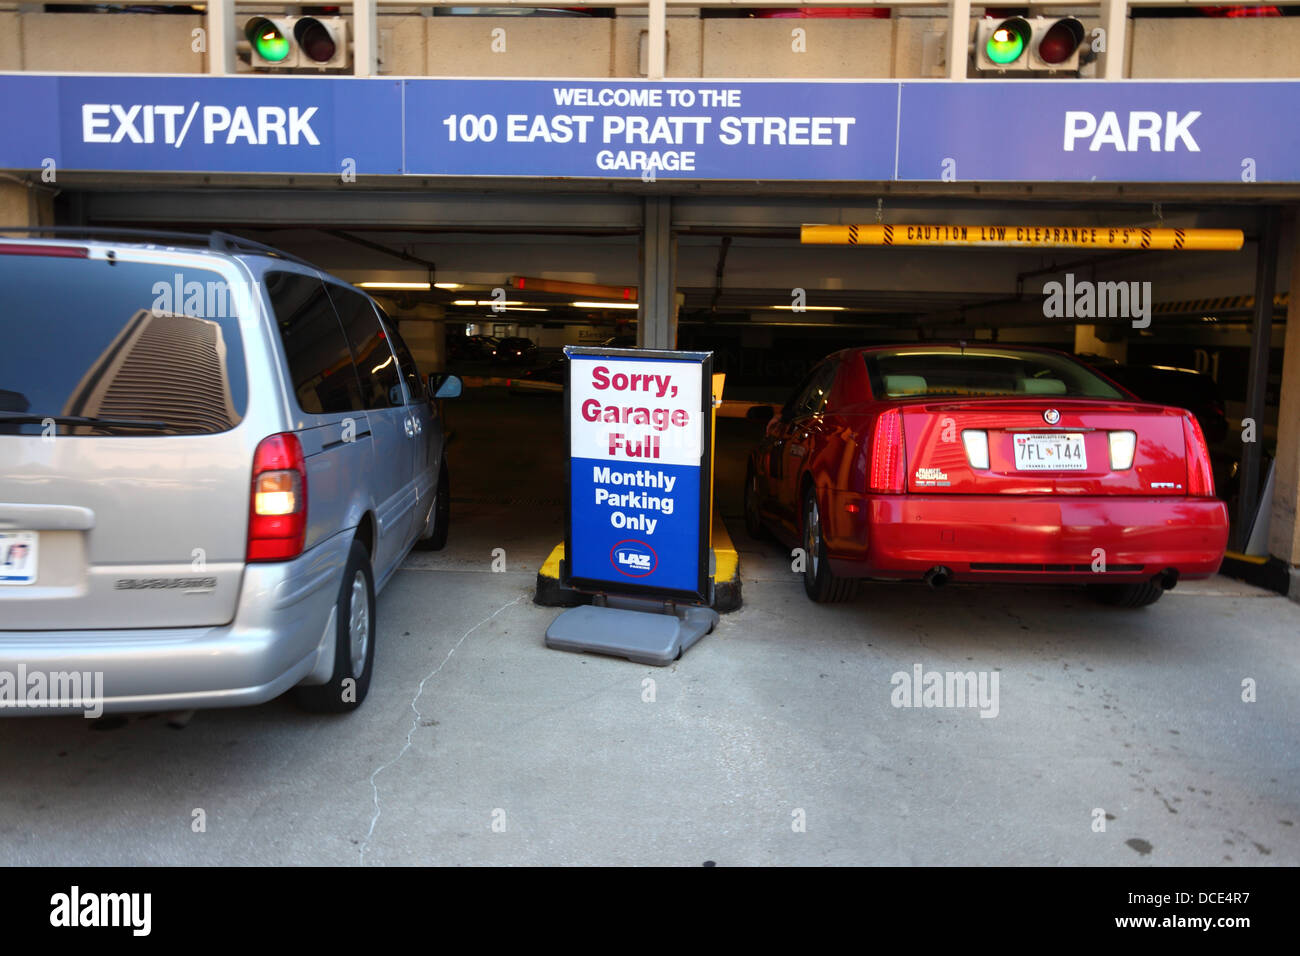 Garage full sign and cars waiting outside garage at 100 East Pratt Street, Baltimore City, Maryland, USA Stock Photo